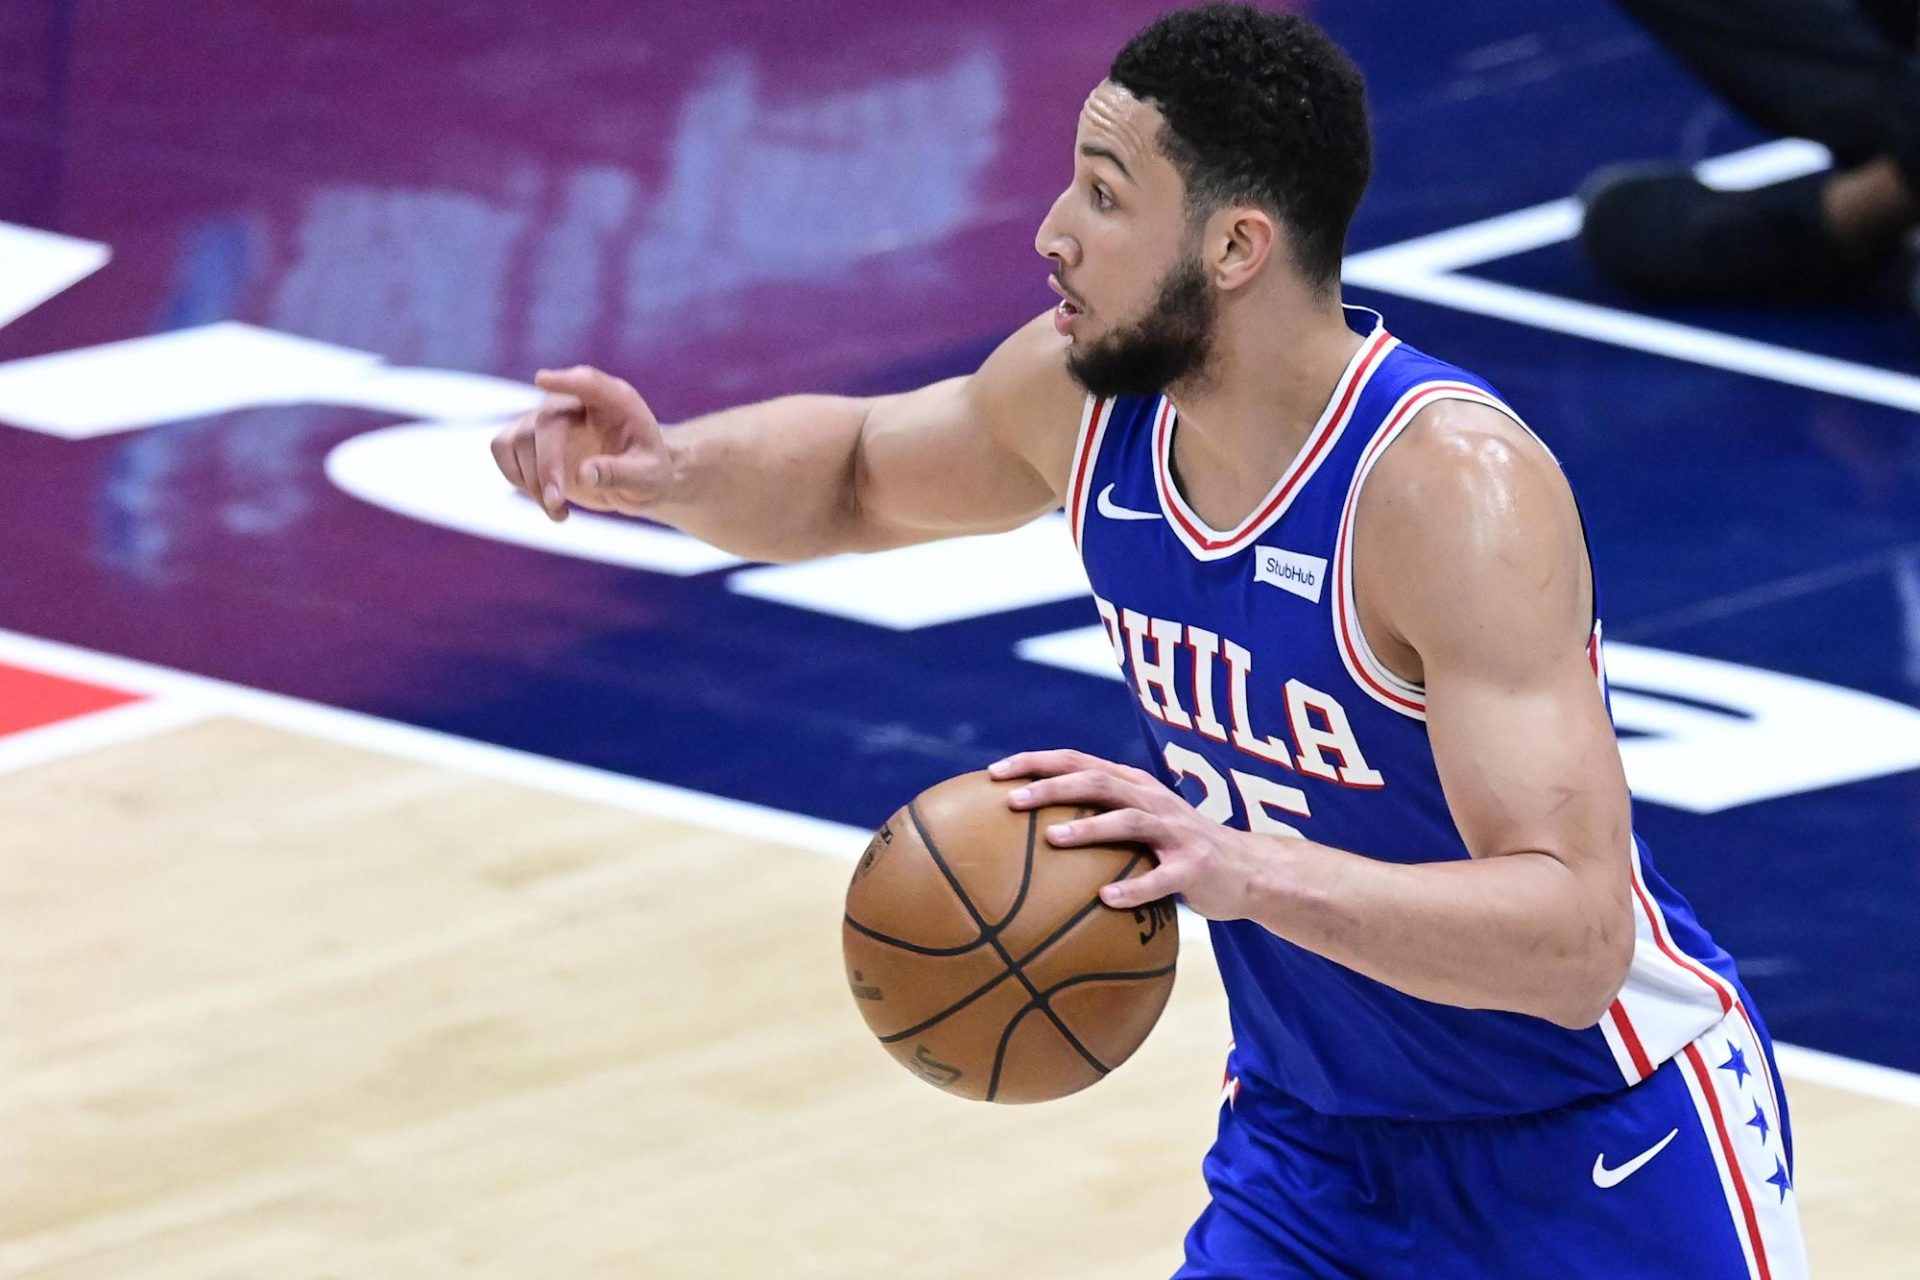 Ben Simmons, Sixers focus on free throw struggles in loss to Wizards